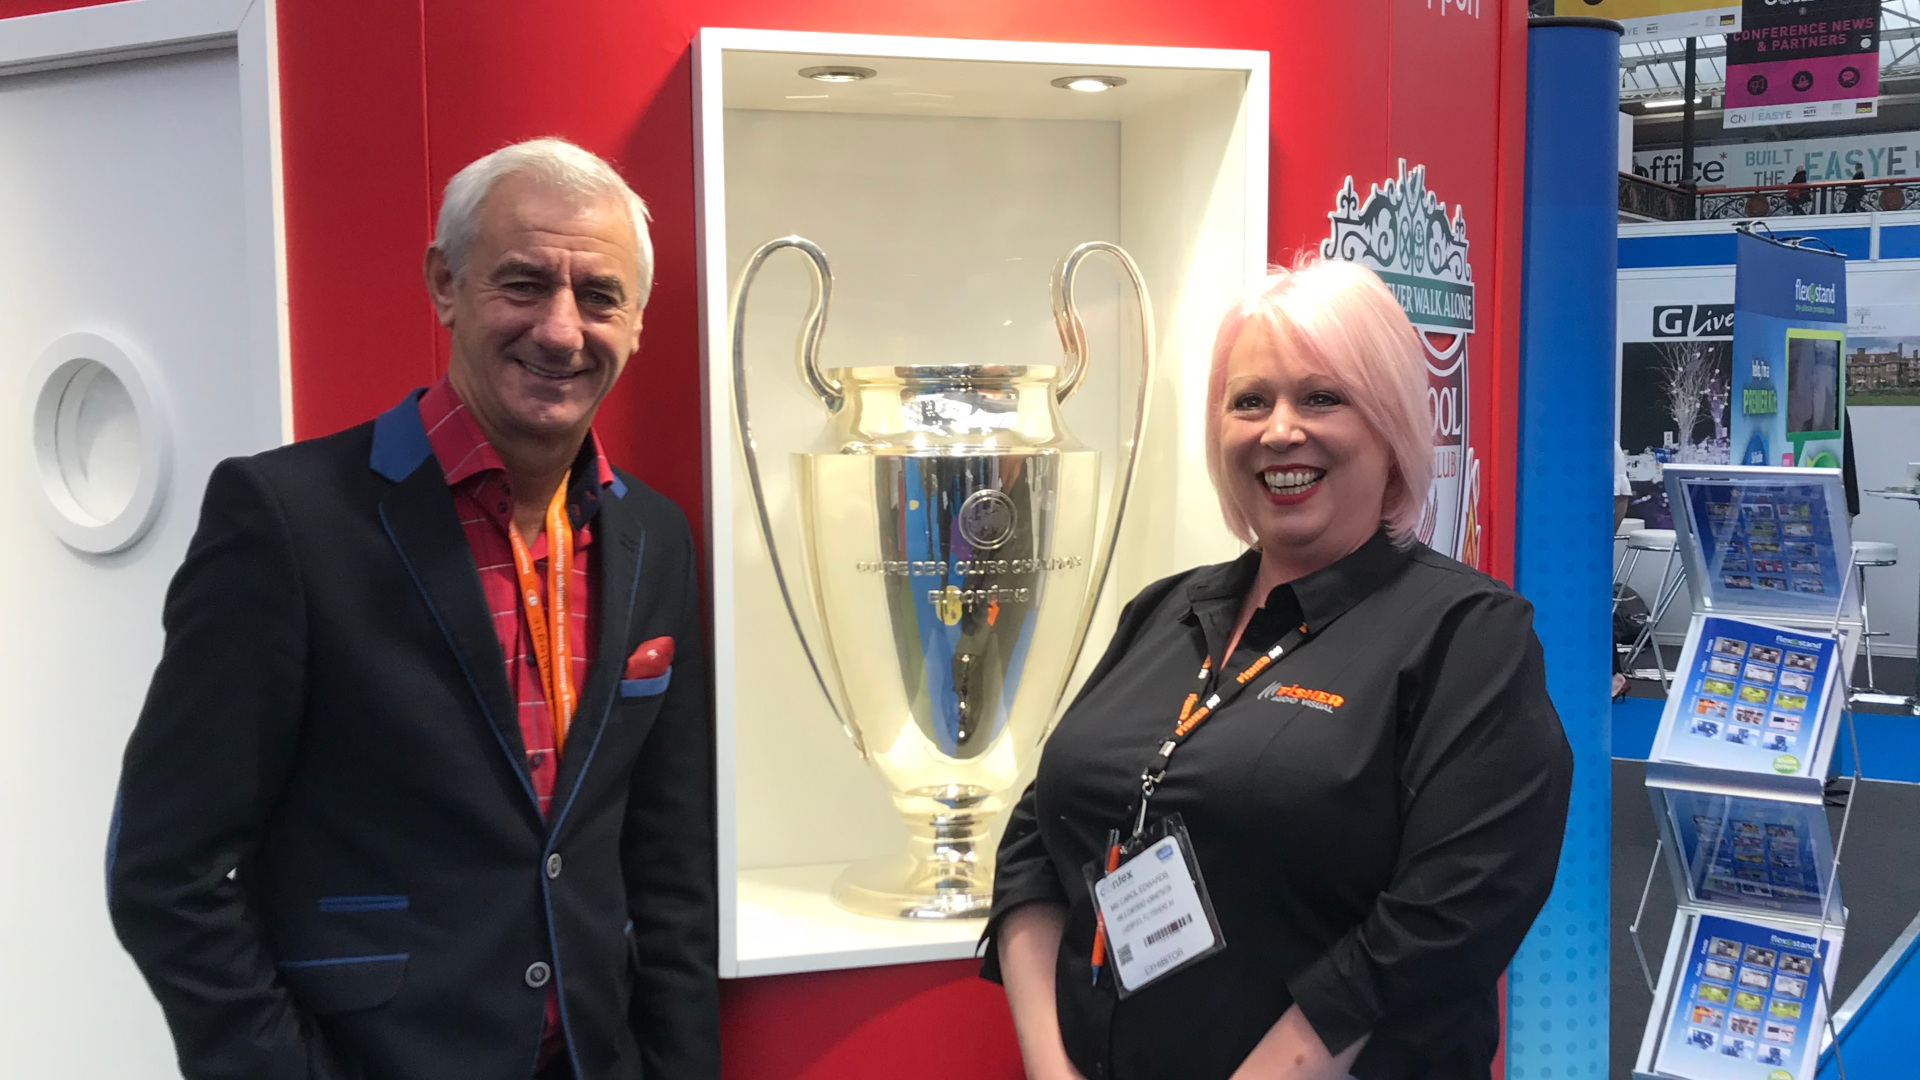 CHS 2018: Liverpool Legend Ian Rush and Fisher Audio Visual's own Carol Edwards